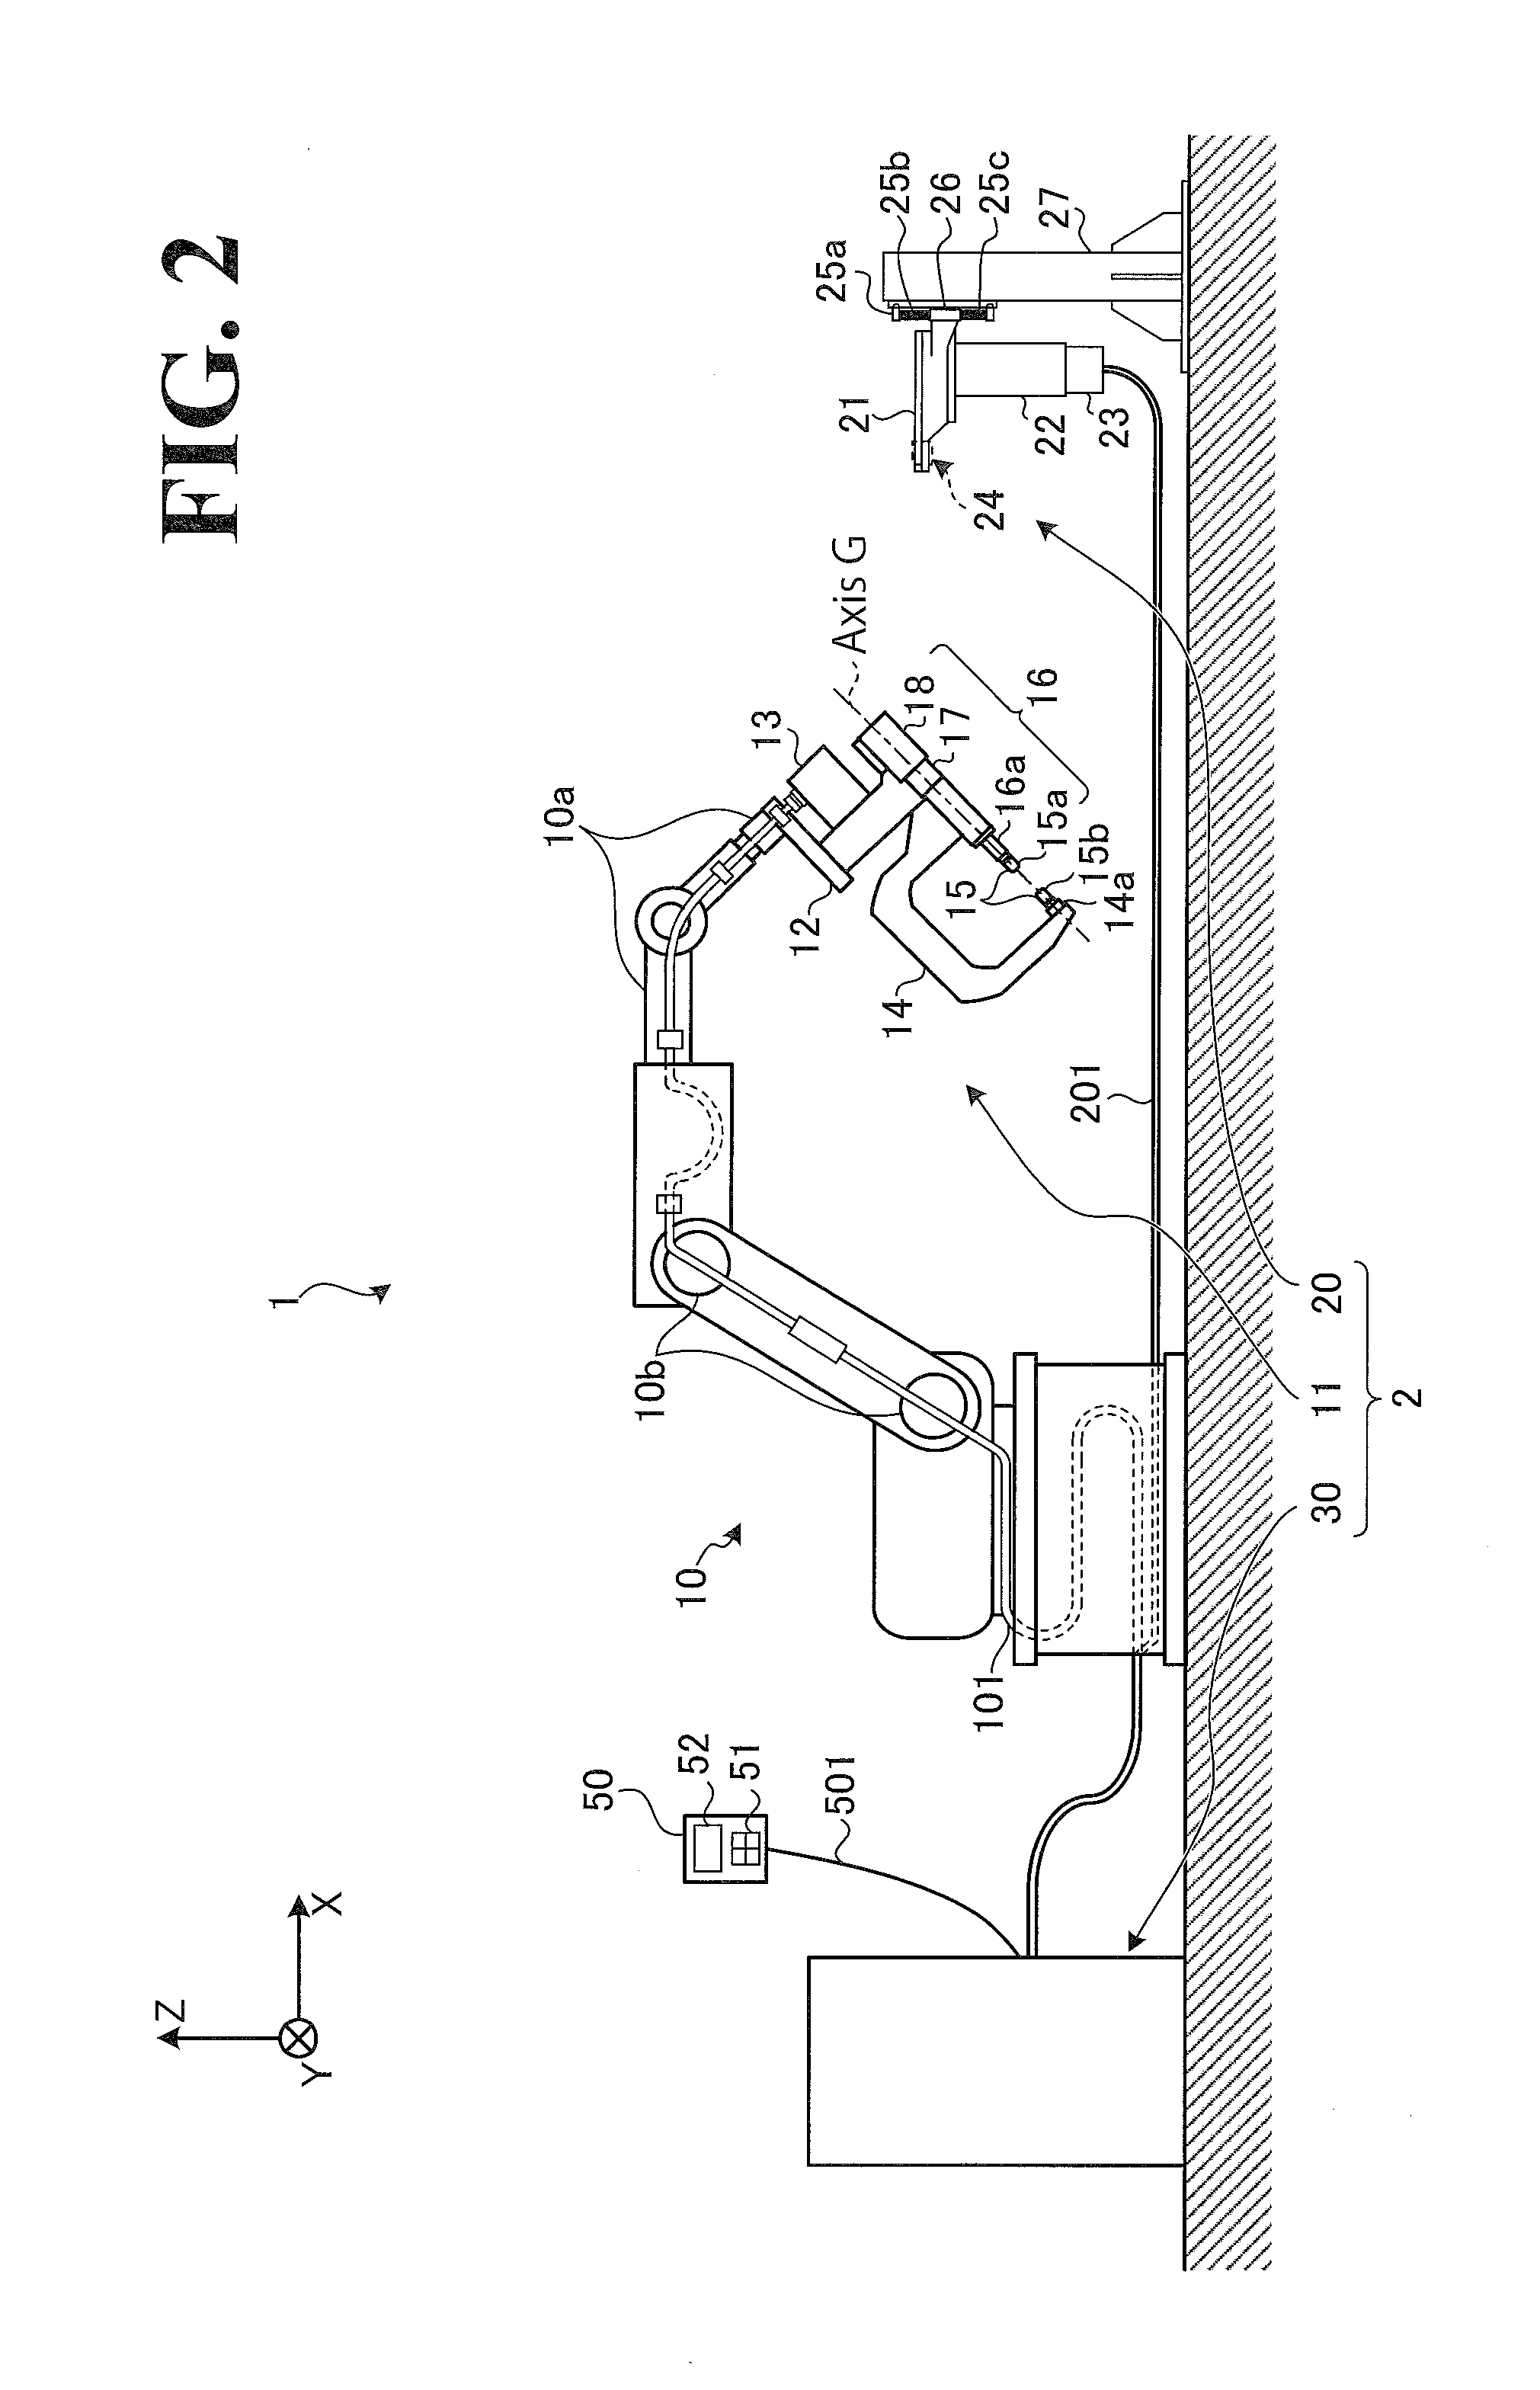 Grinding system and spot welding system